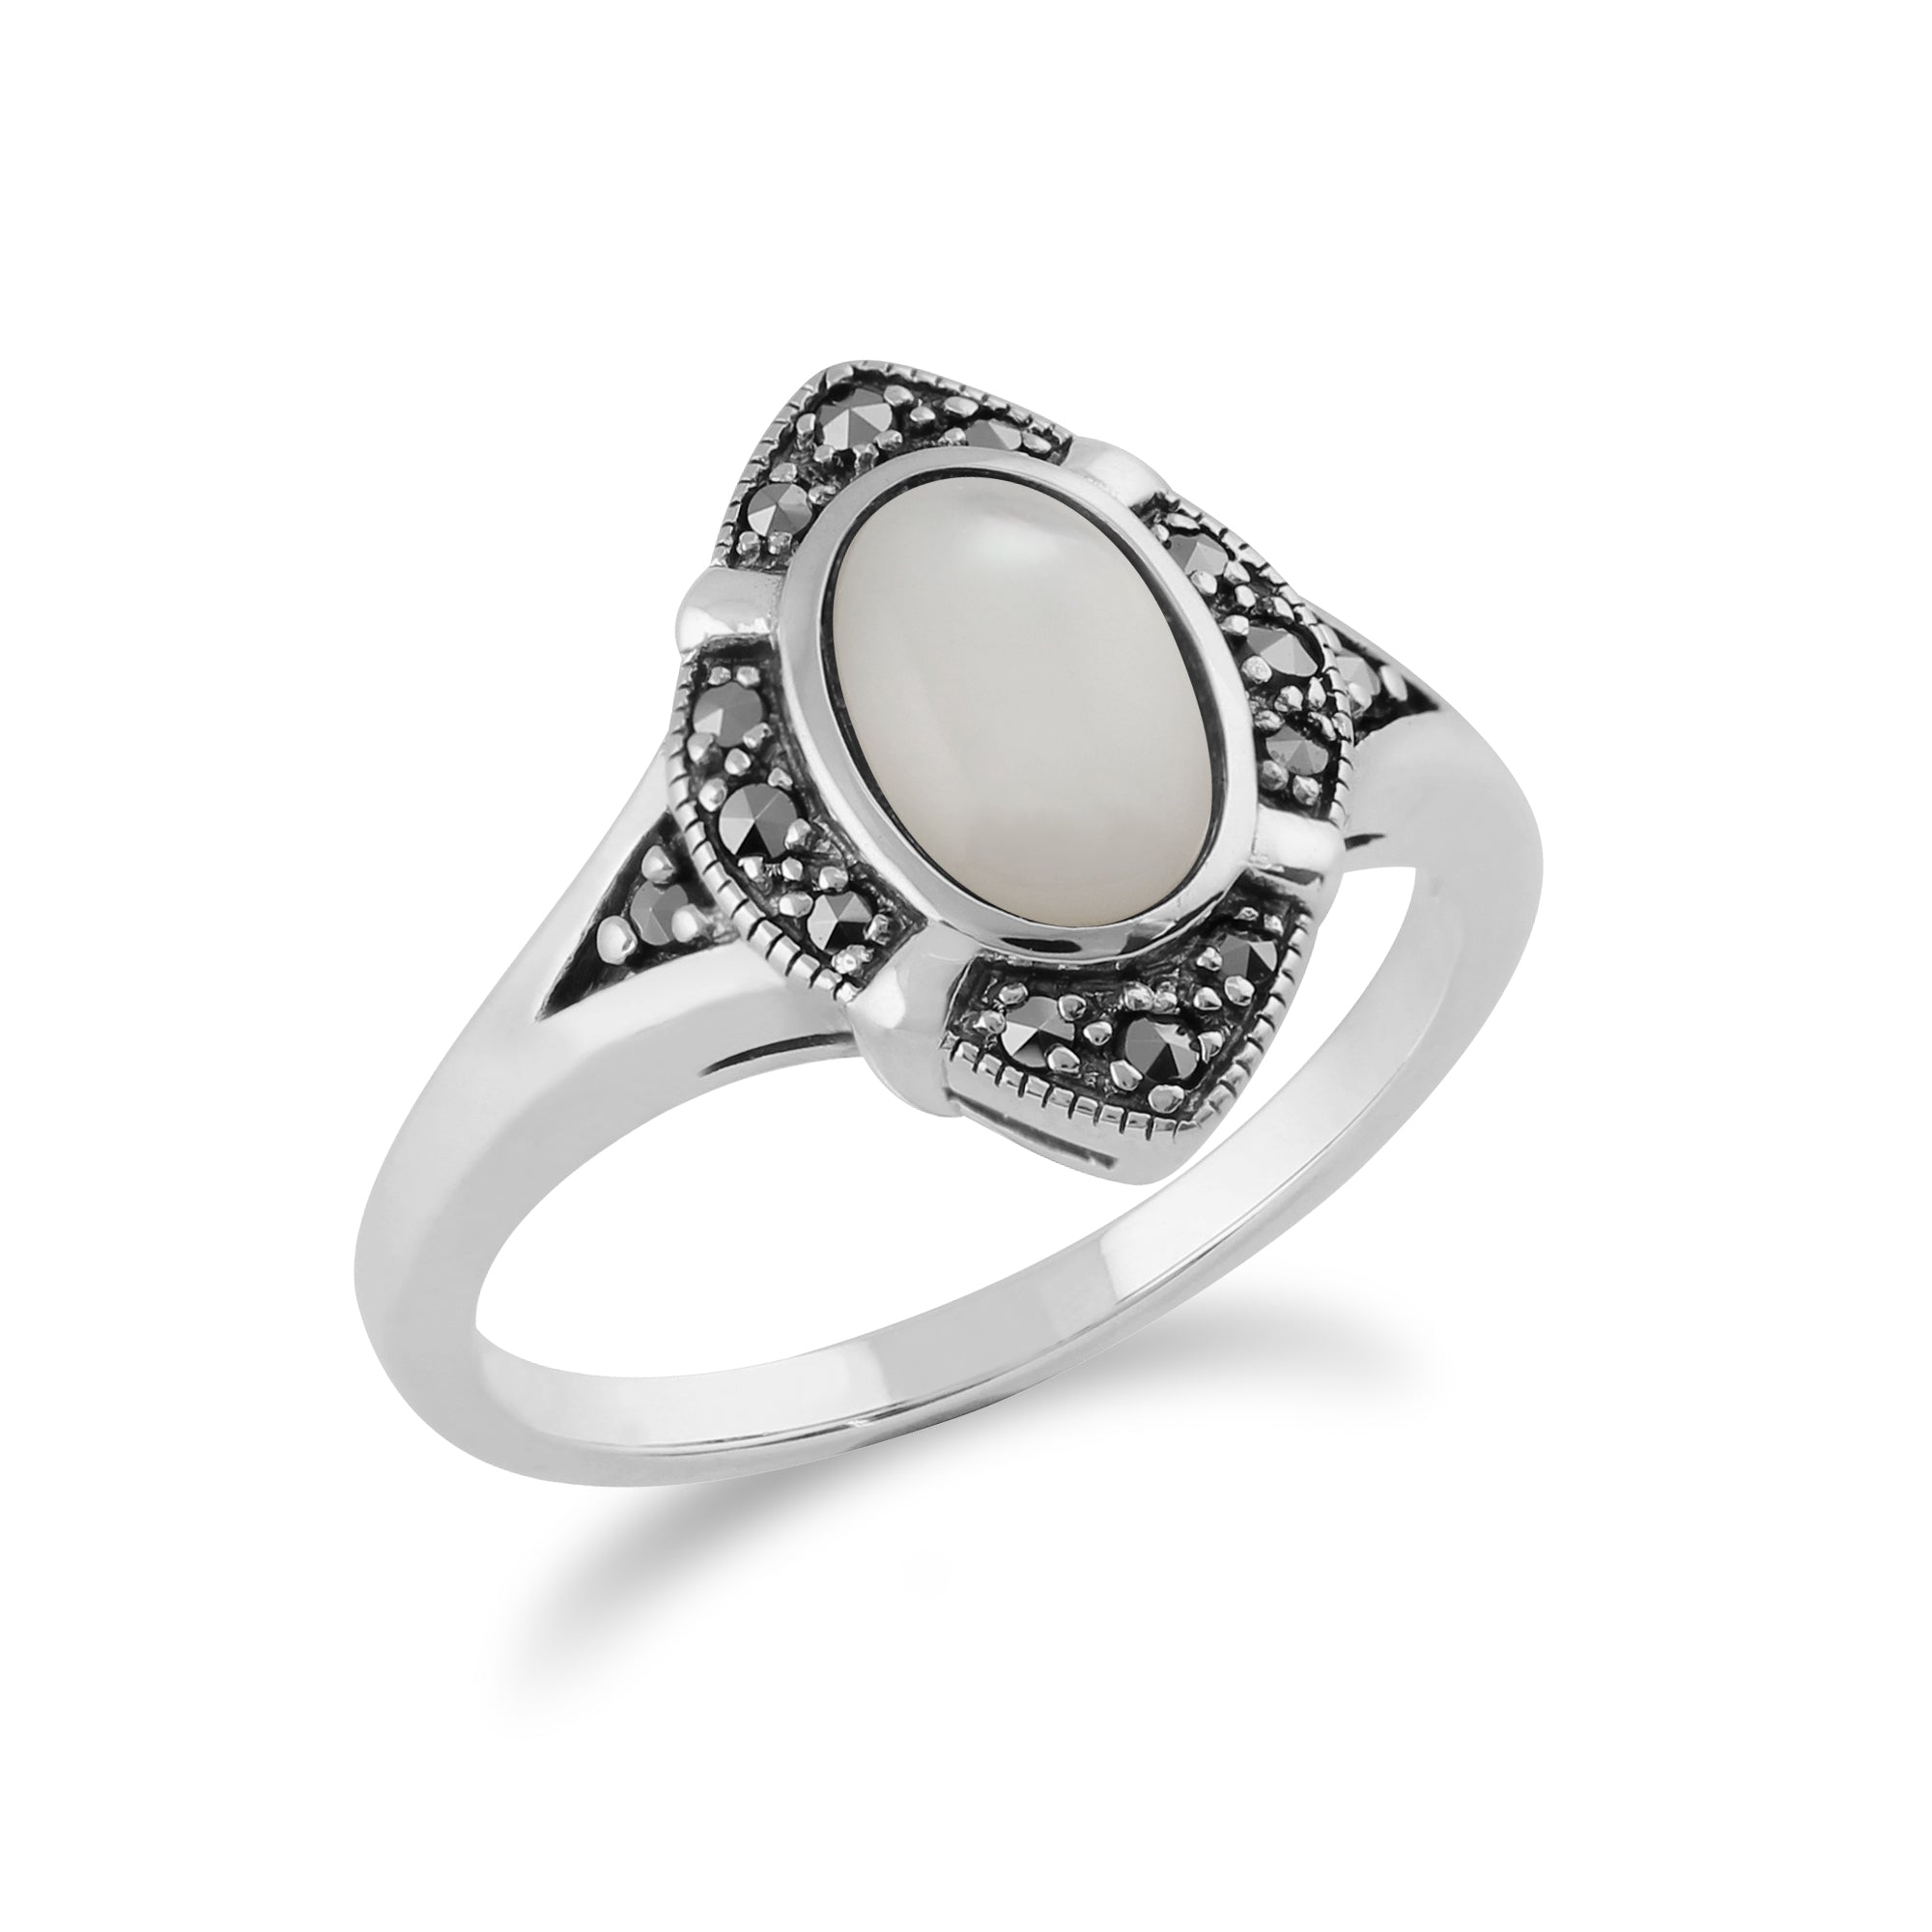 214R585204925 Gemondo 925 Sterling Silver 1.00ct Mother of Pearl & Marcasite Art Deco Ring 2